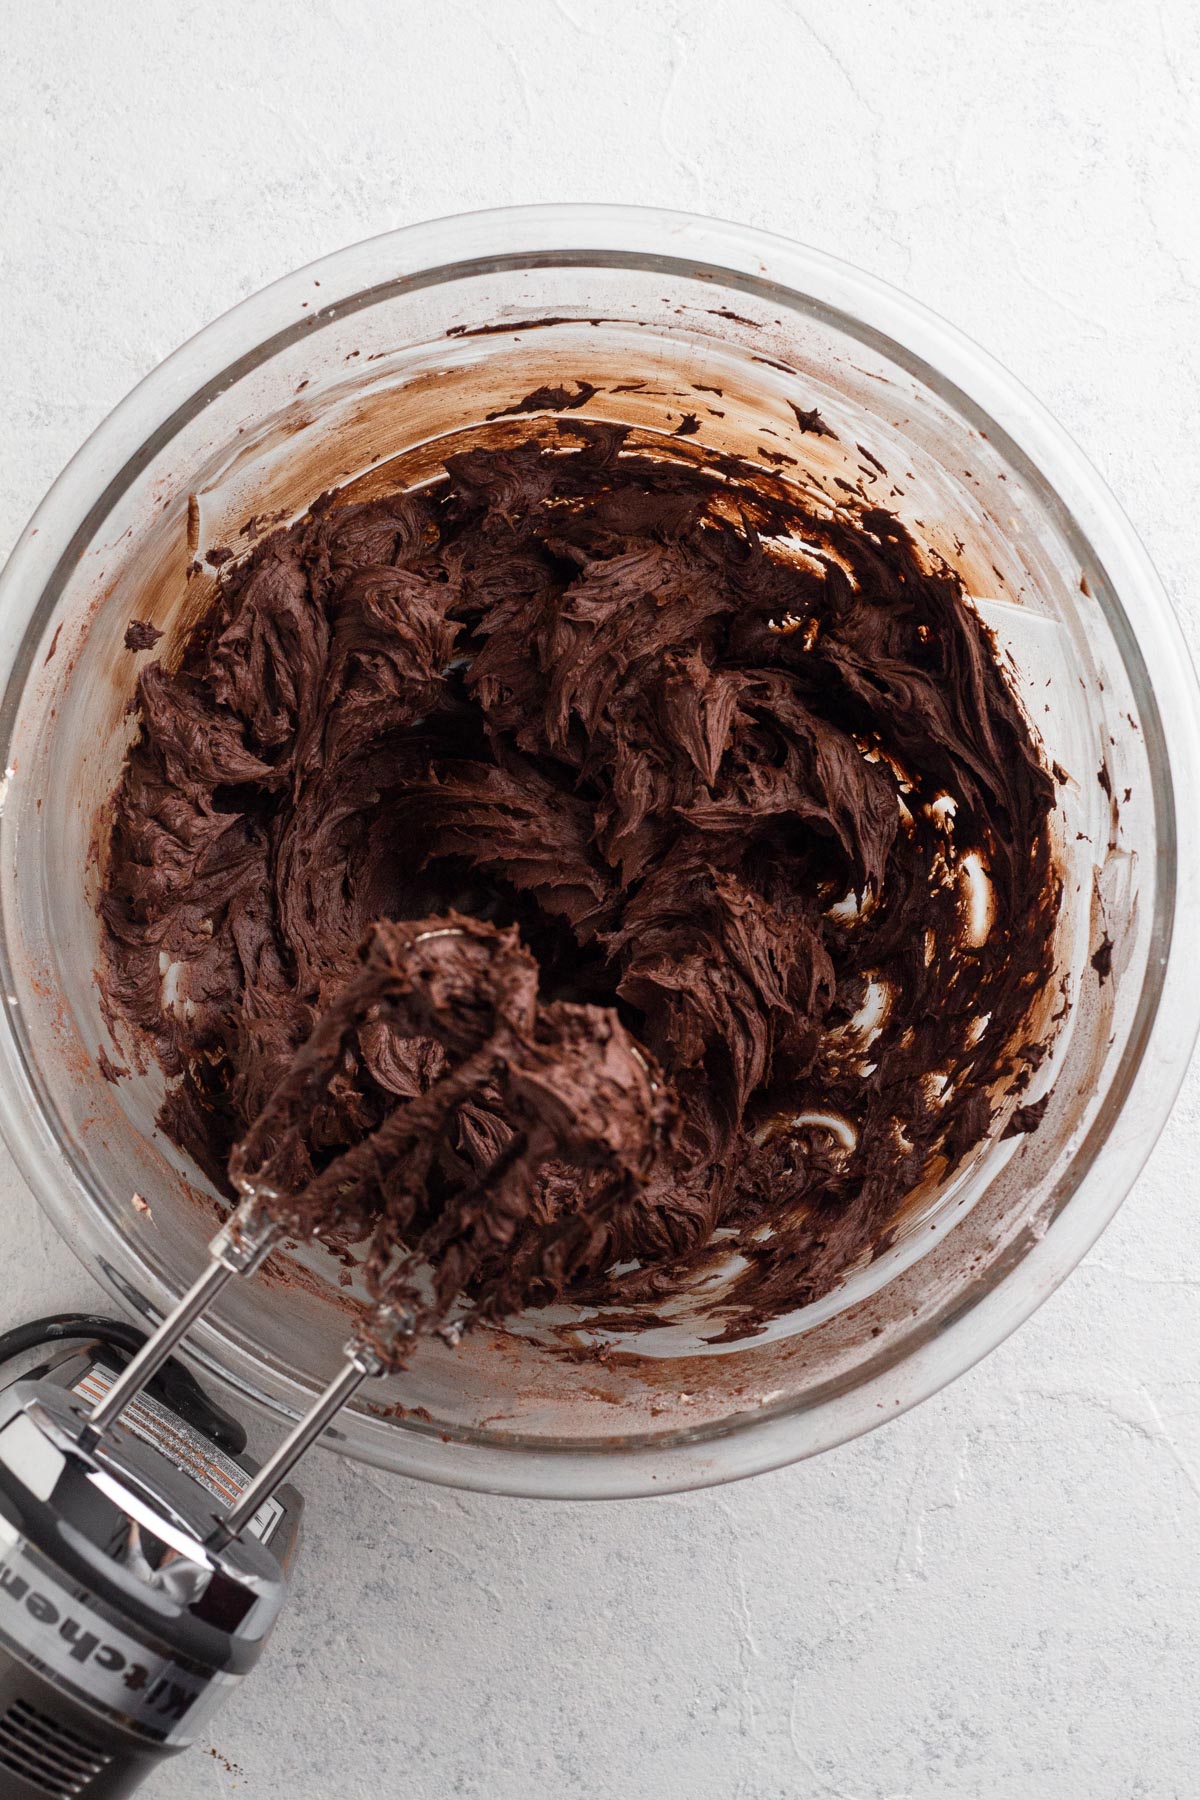 Chocolate buttercream frosting in a glass mixing bowl with an electric hand mixer.